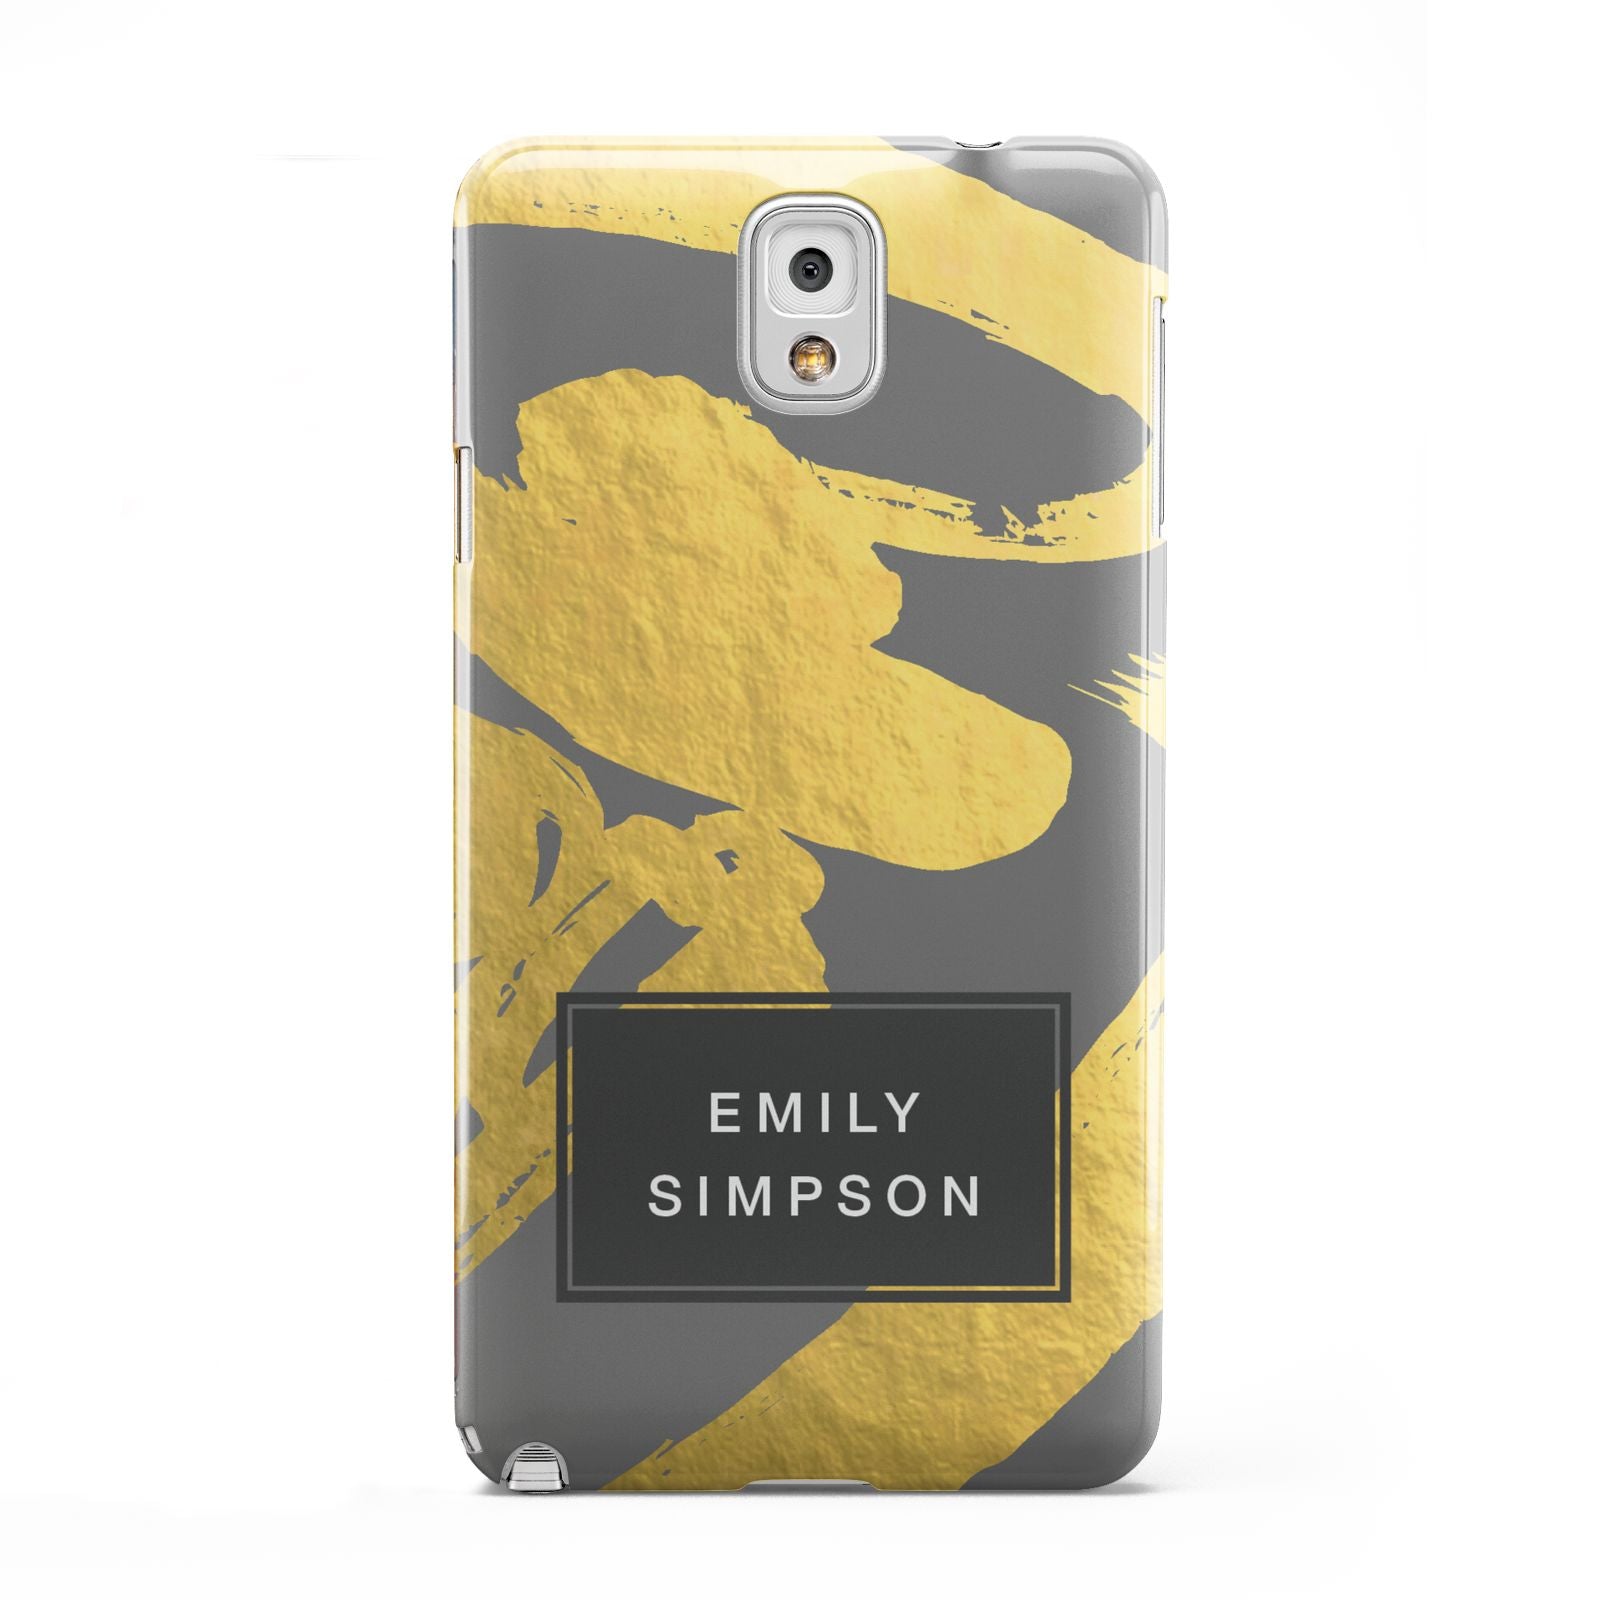 Personalised Gold Leaf Grey With Name Samsung Galaxy Note 3 Case